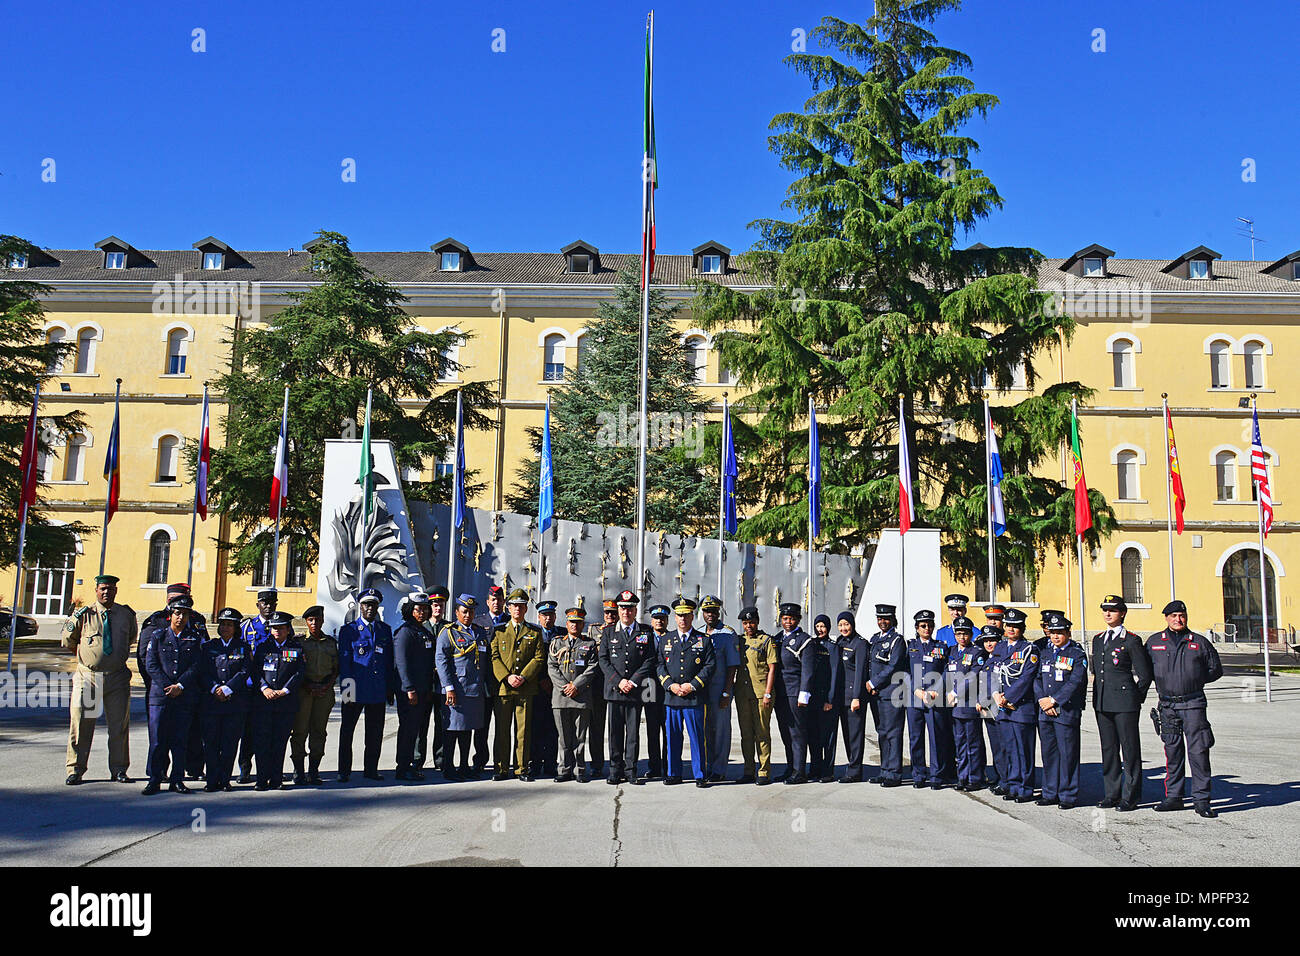 Brig. Gen. Giovanni Pietro Barbano (center), Center of Excellence for Stability Police Units (CoESPU) director, U.S. Army Col. Darius S. Gallegos, CoESPU deputy director and students from Europe, Africa, Italy and the U.S. pose for a group photo during the opening ceremony of the 5th “Gender Protection in Peace Operations” Course at the CoESPU in Vicenza, Italy, Mar. 8, 2017. (U.S. Army Photo by Visual Information Specialist Paolo Bovo/released) Stock Photo